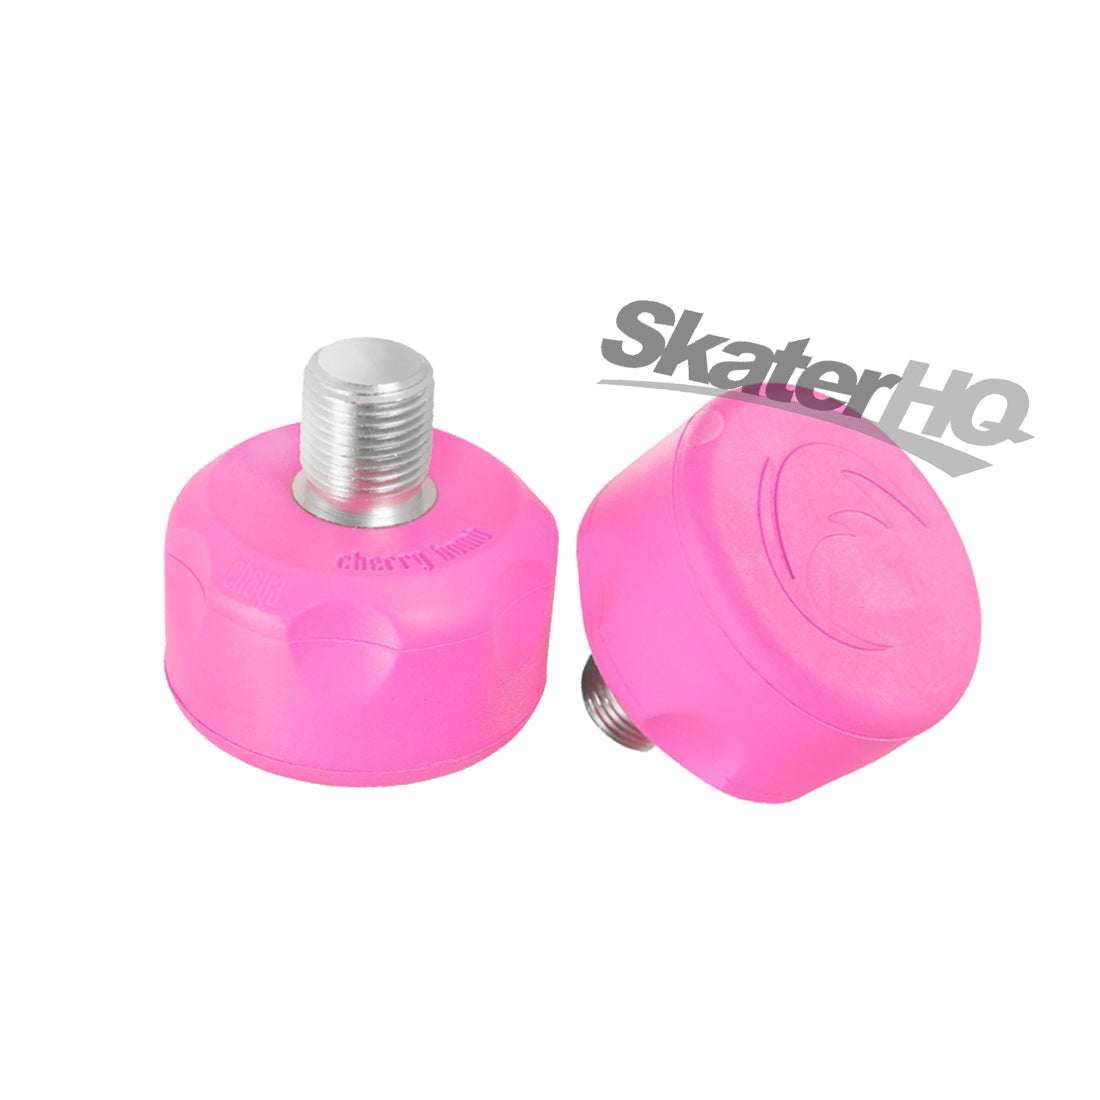 Chaya Cherry Bomb Short Flat Toe Stop - Passion Pink Roller Skate Hardware and Parts